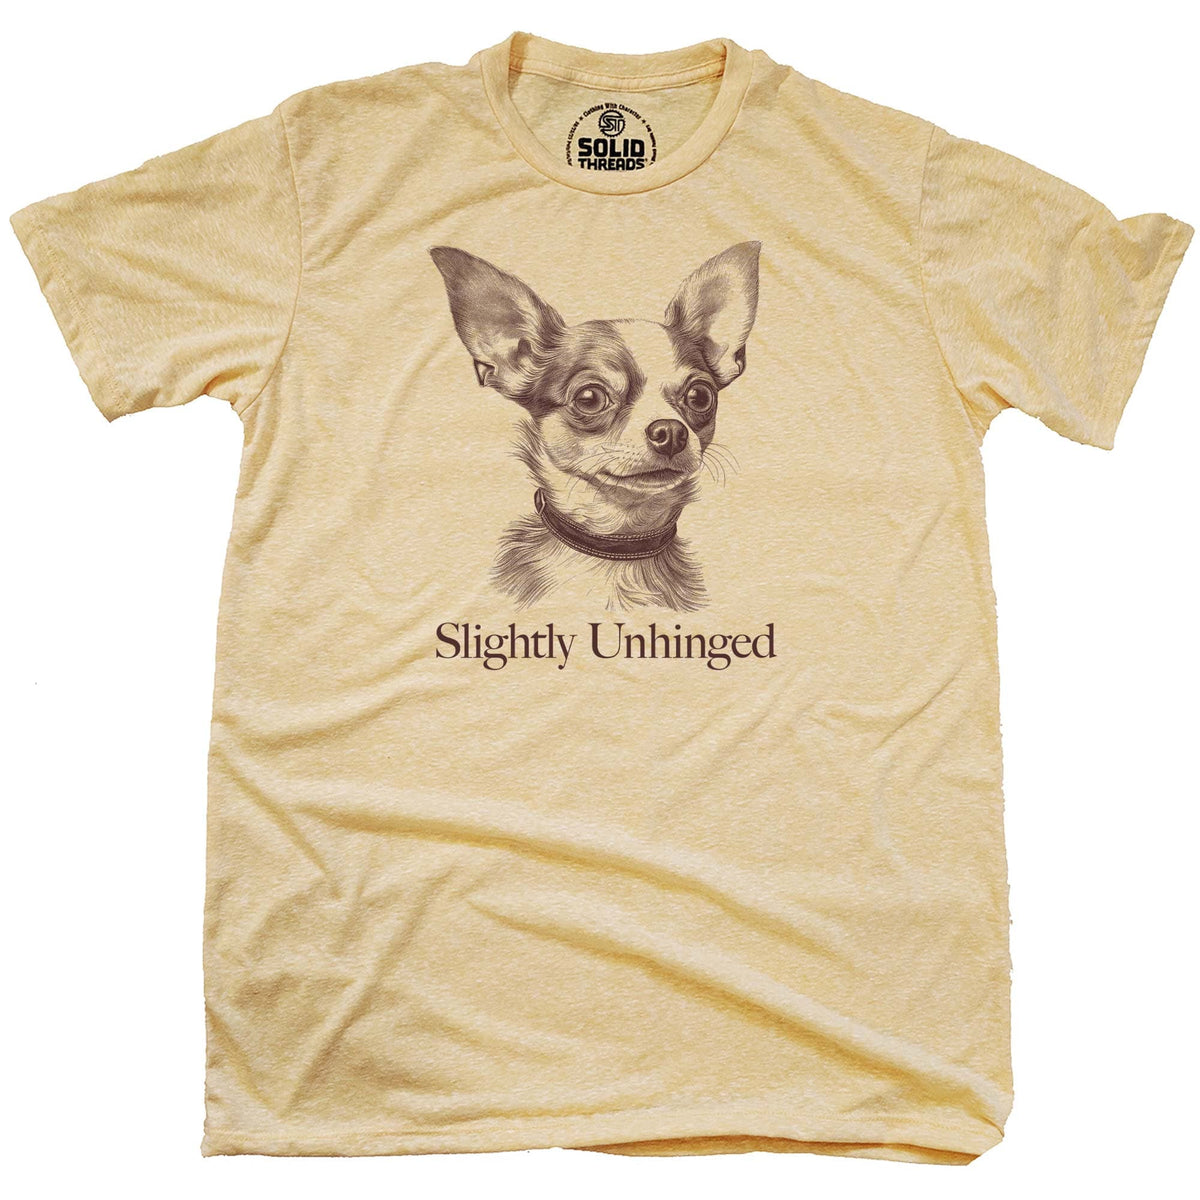 Men&#39;s Slightly Unhinged Chihuahua Funny Meme Graphic T-Shirt | Cool Crazy Dog Tee | Solid Threads